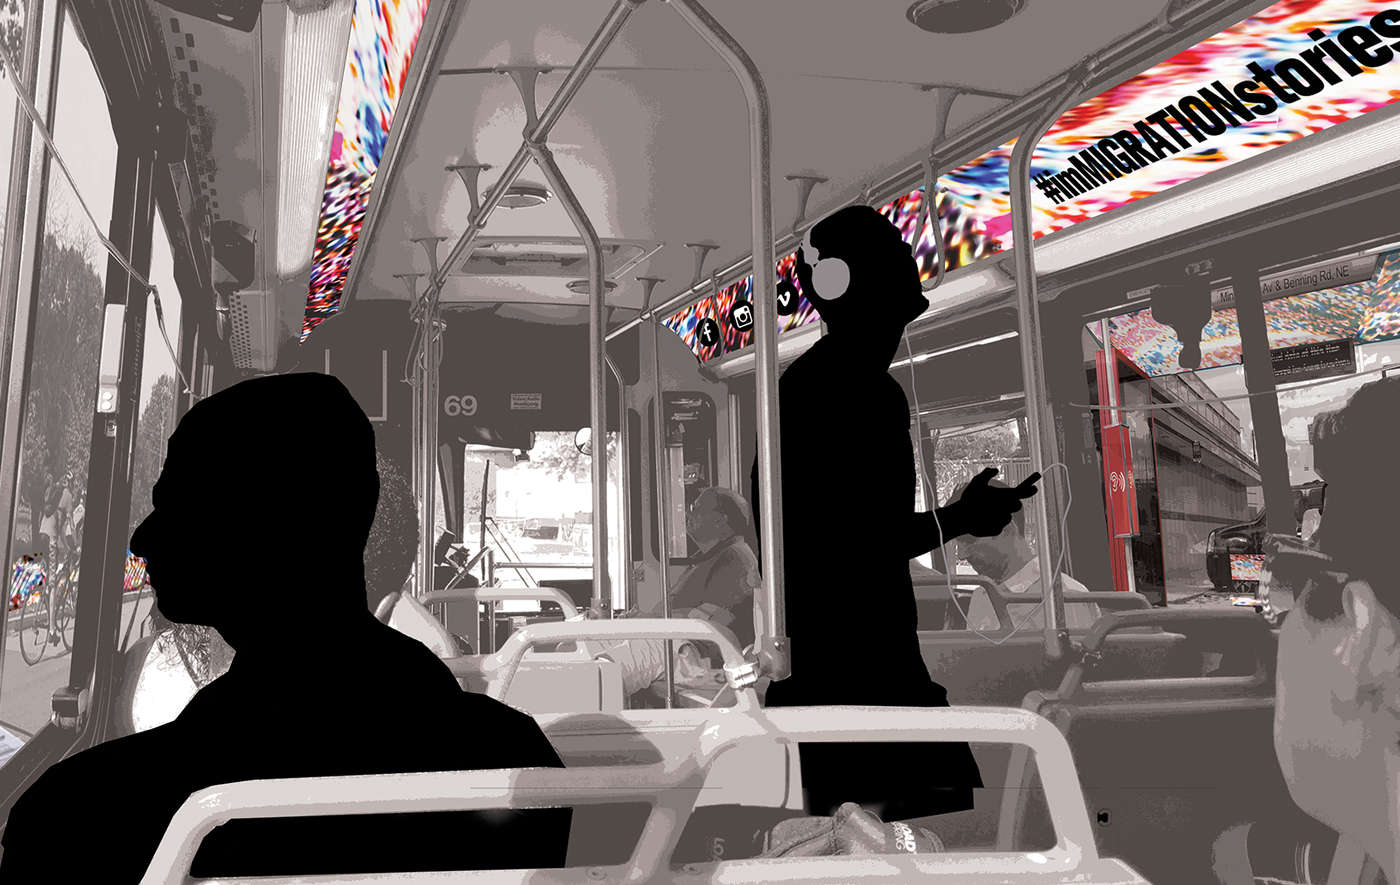 This image demonstrates how The Im(migrant) memorial would operate inside a bus along the memorial loop, through audio stories experienced via smartphone podcasts and visually along the corridor of the bus route.